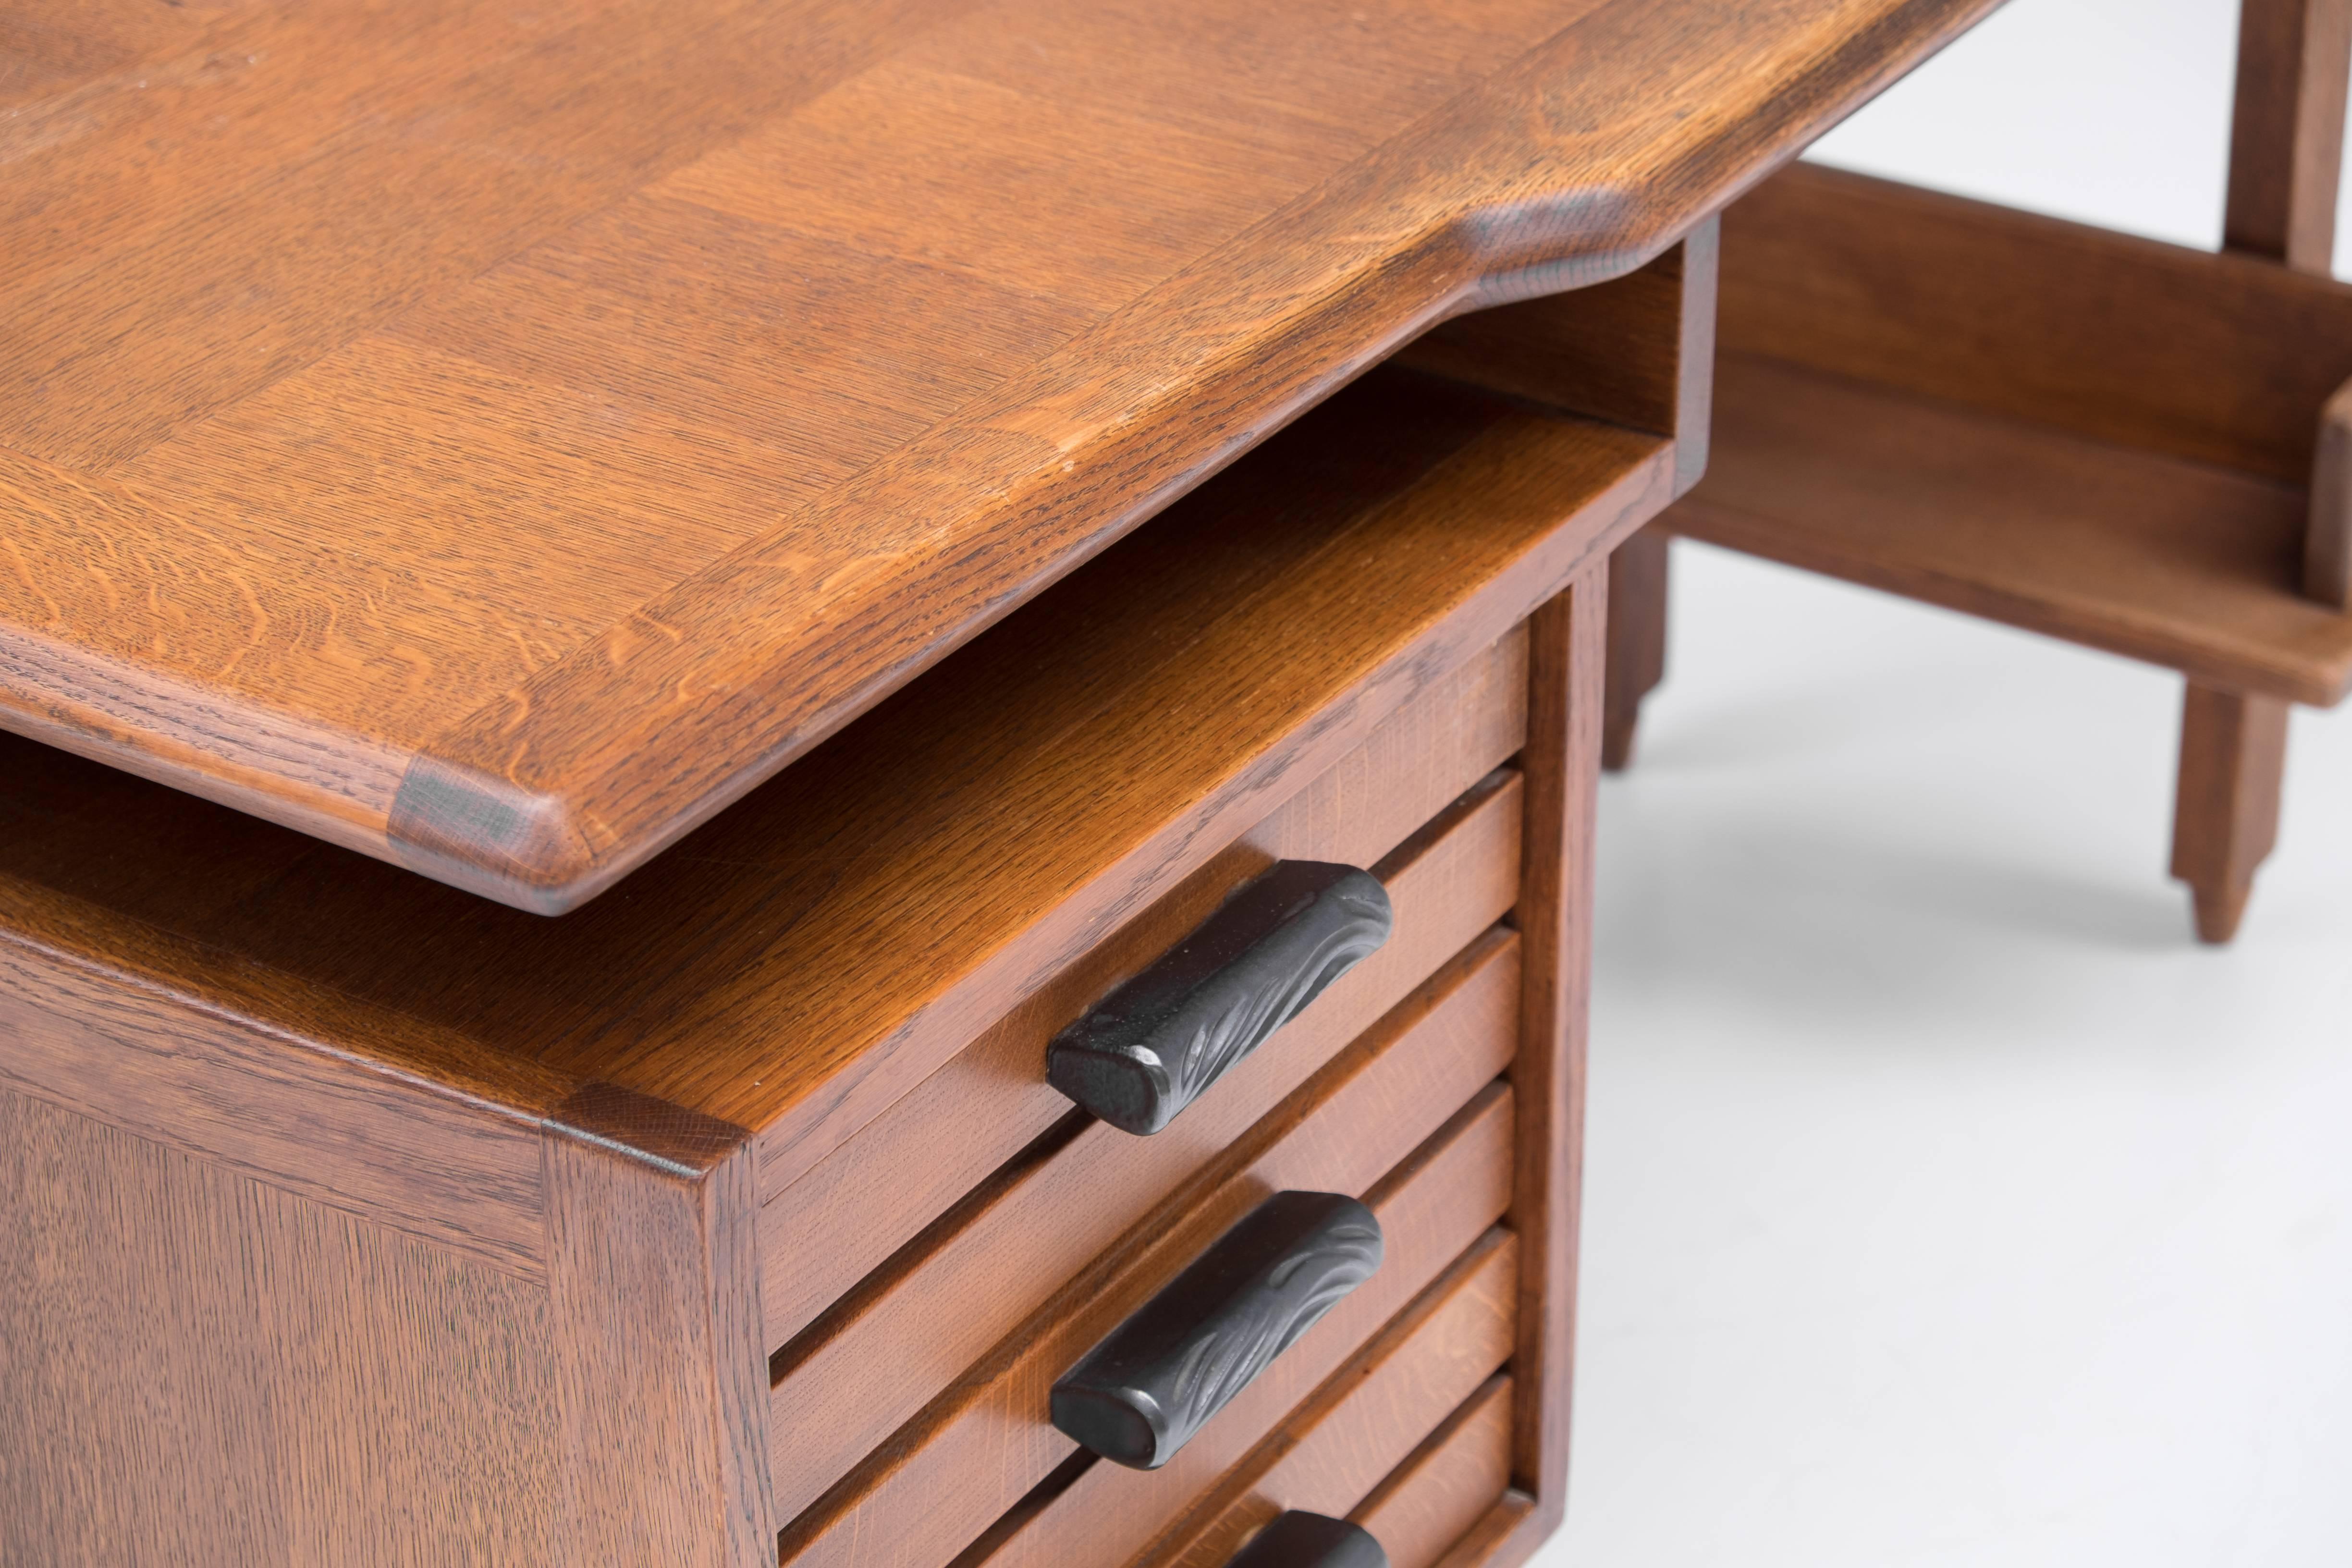 20th Century Guillerme et Chambron Desk in Oak with Ceramic Drawer Pulls, French, 1960s